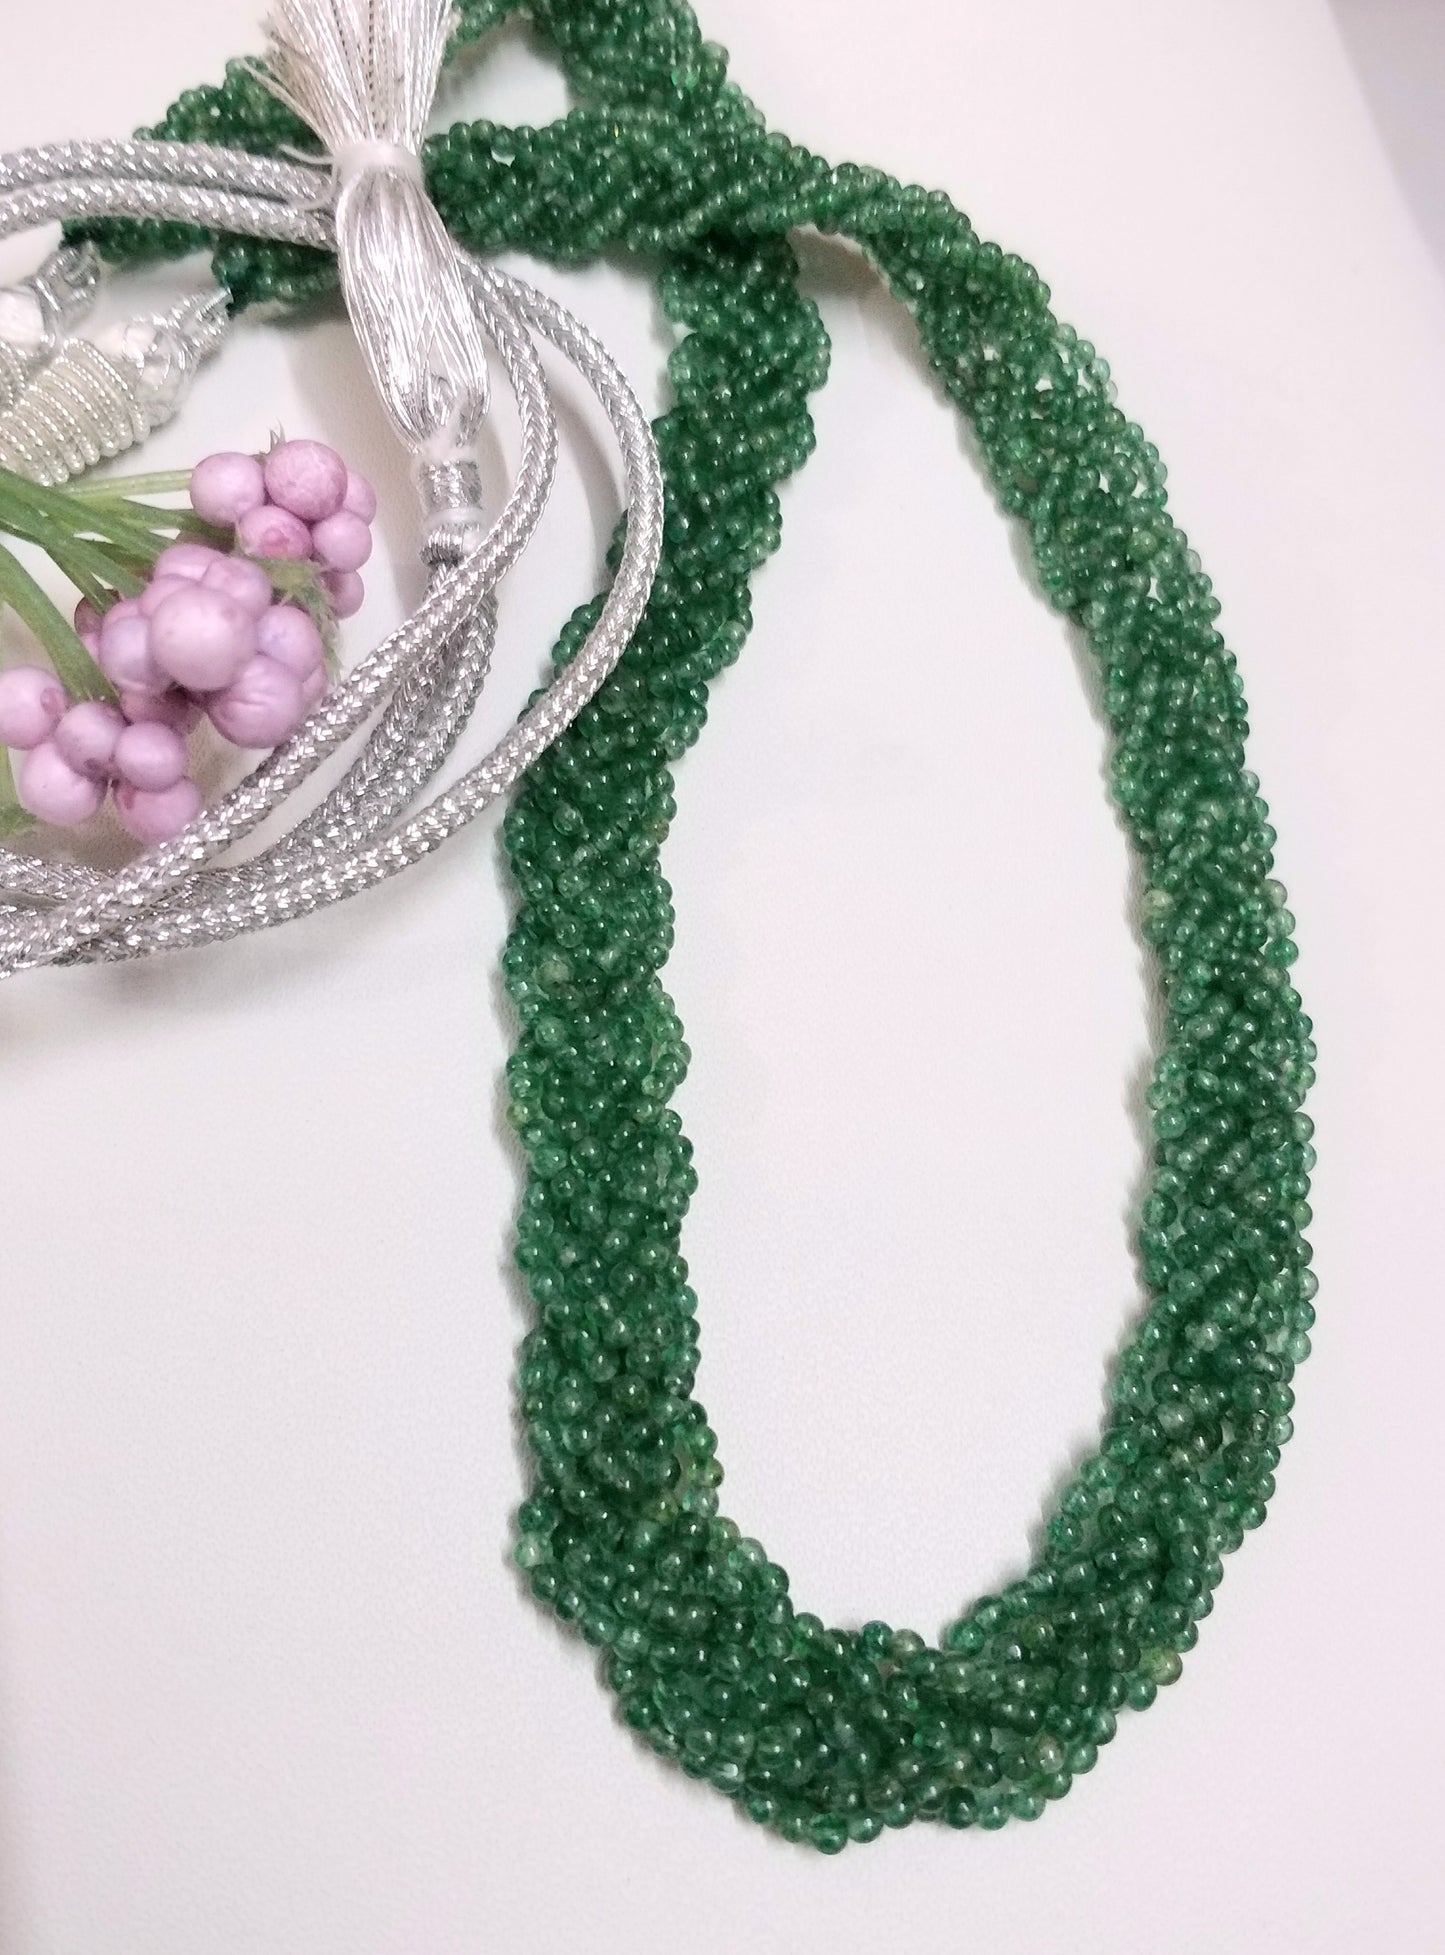 Natural Green Onyx Beads Necklace, Choker Necklace